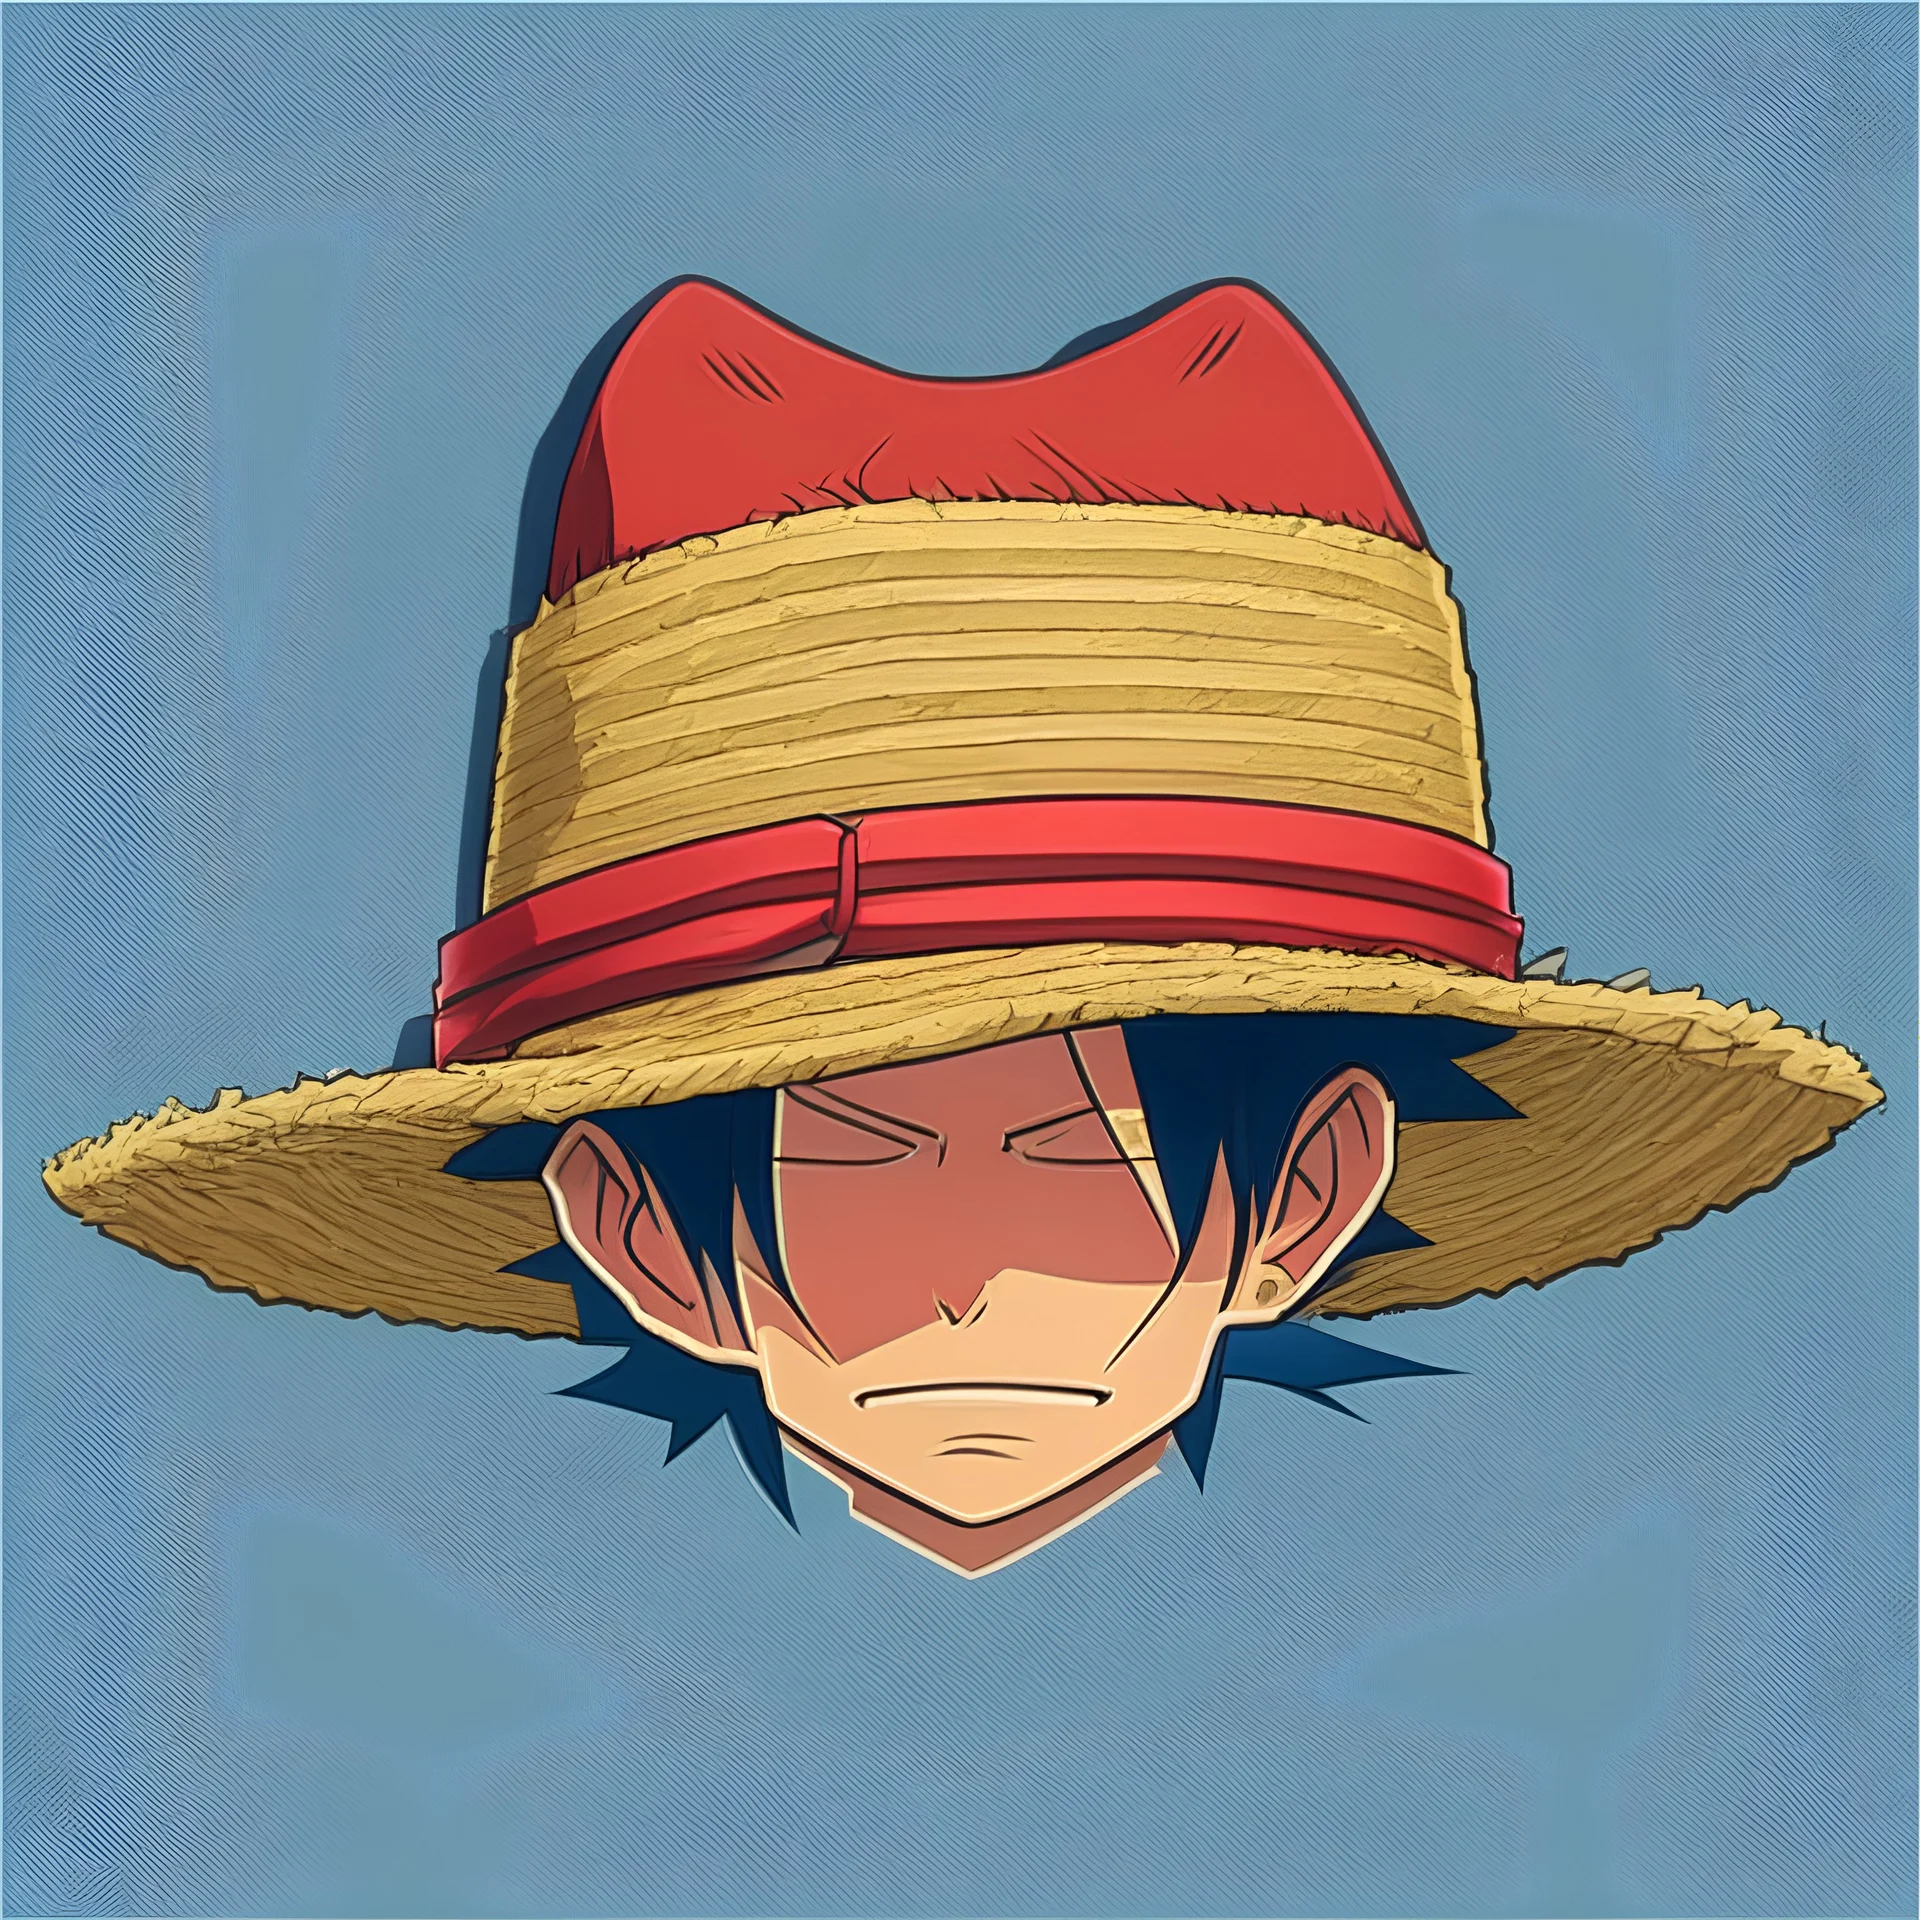 create a hat with style hat illustration similar to luffy's